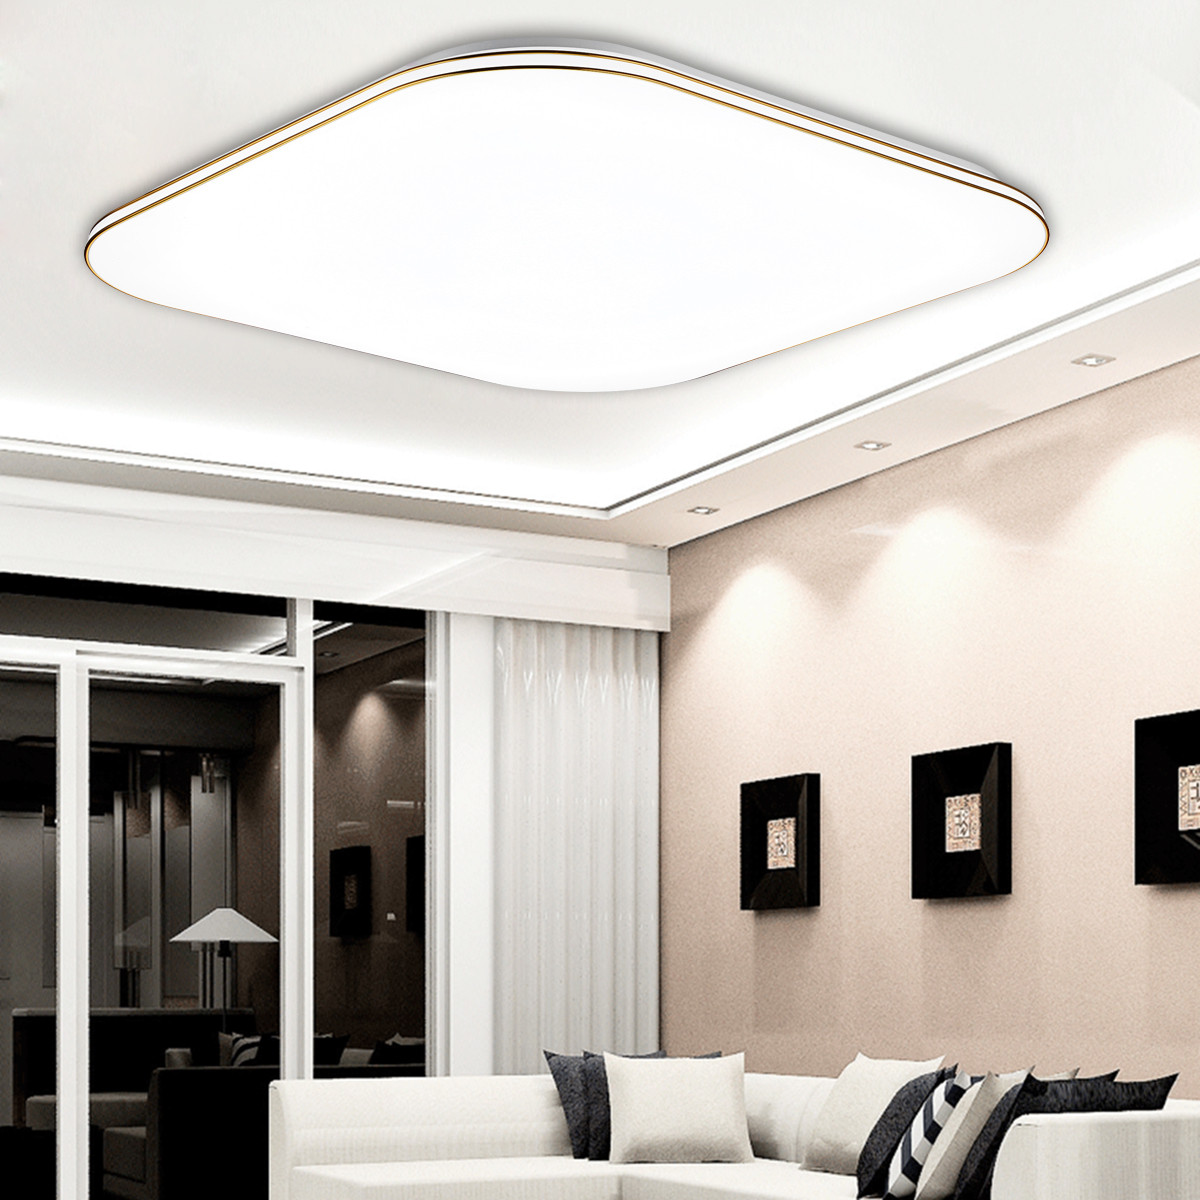 Led Kitchen Ceiling Lights Unique 36w Dimmable Led Ceiling Down Light Bathroom Fitting Of Led Kitchen Ceiling Lights 